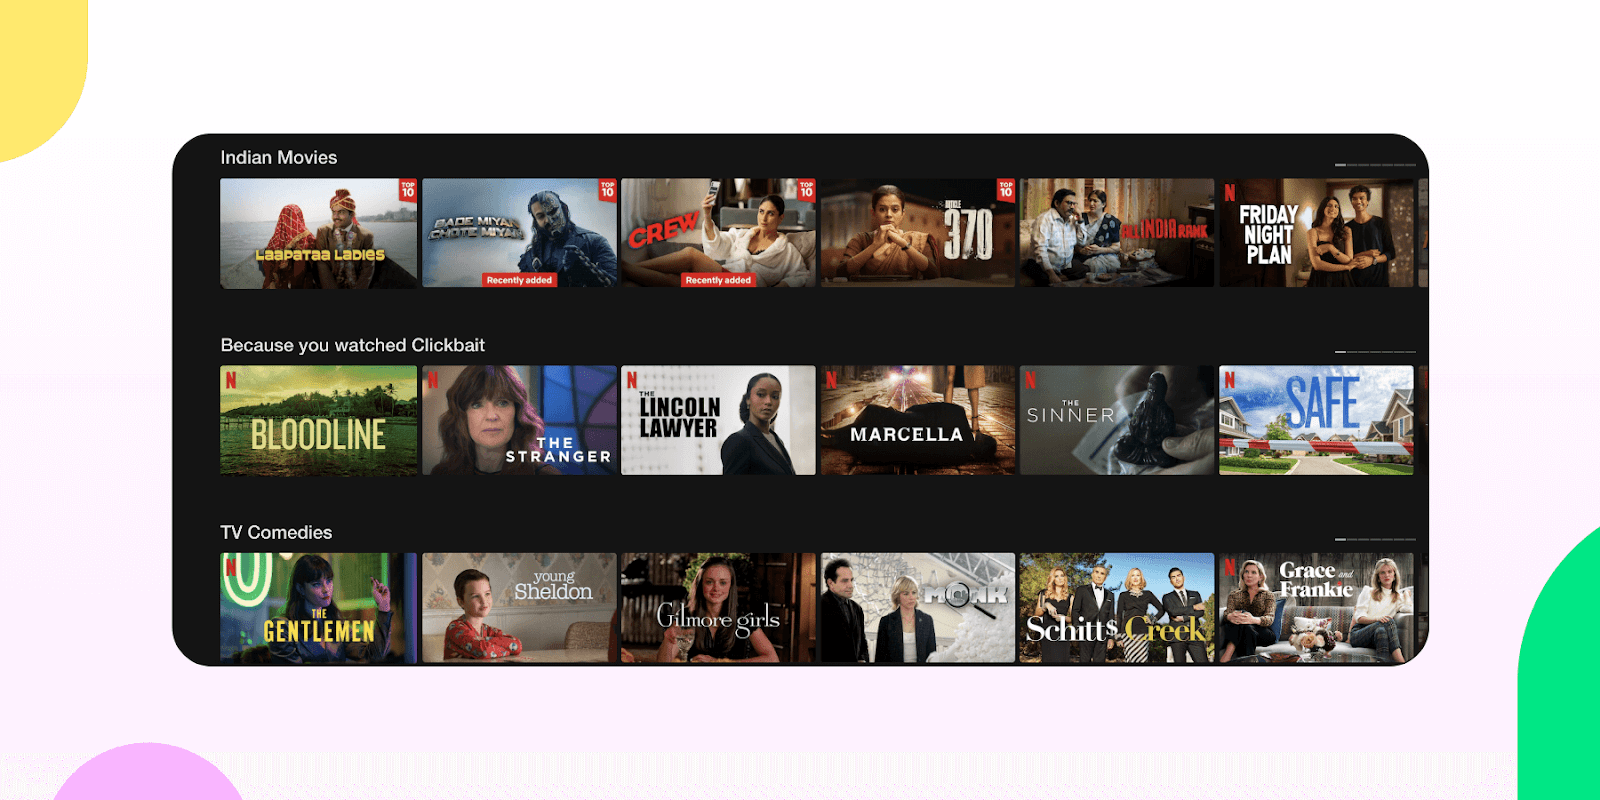 Netflix and its suggestions to users